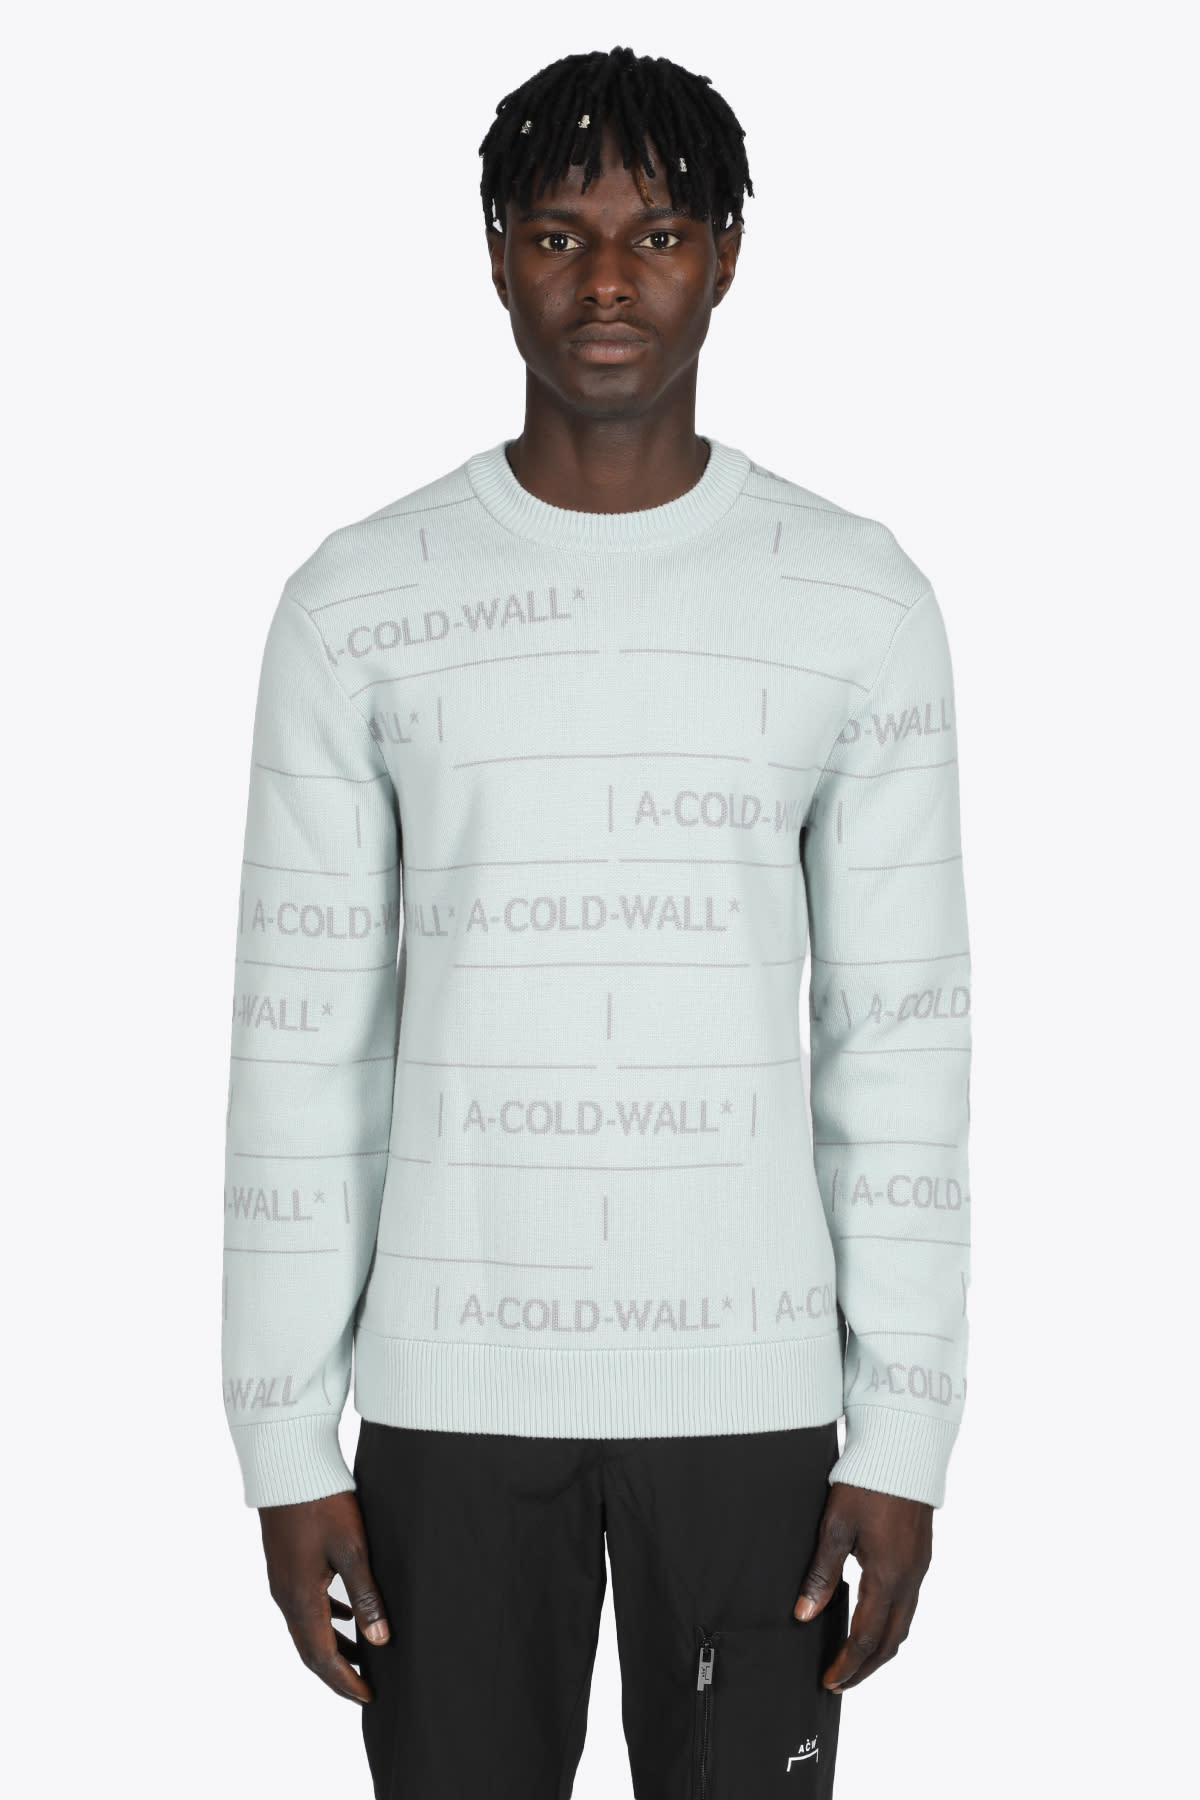 A-COLD-WALL Chain Jacquard Knit Ice grey wool sweater with jacquard pattern logo